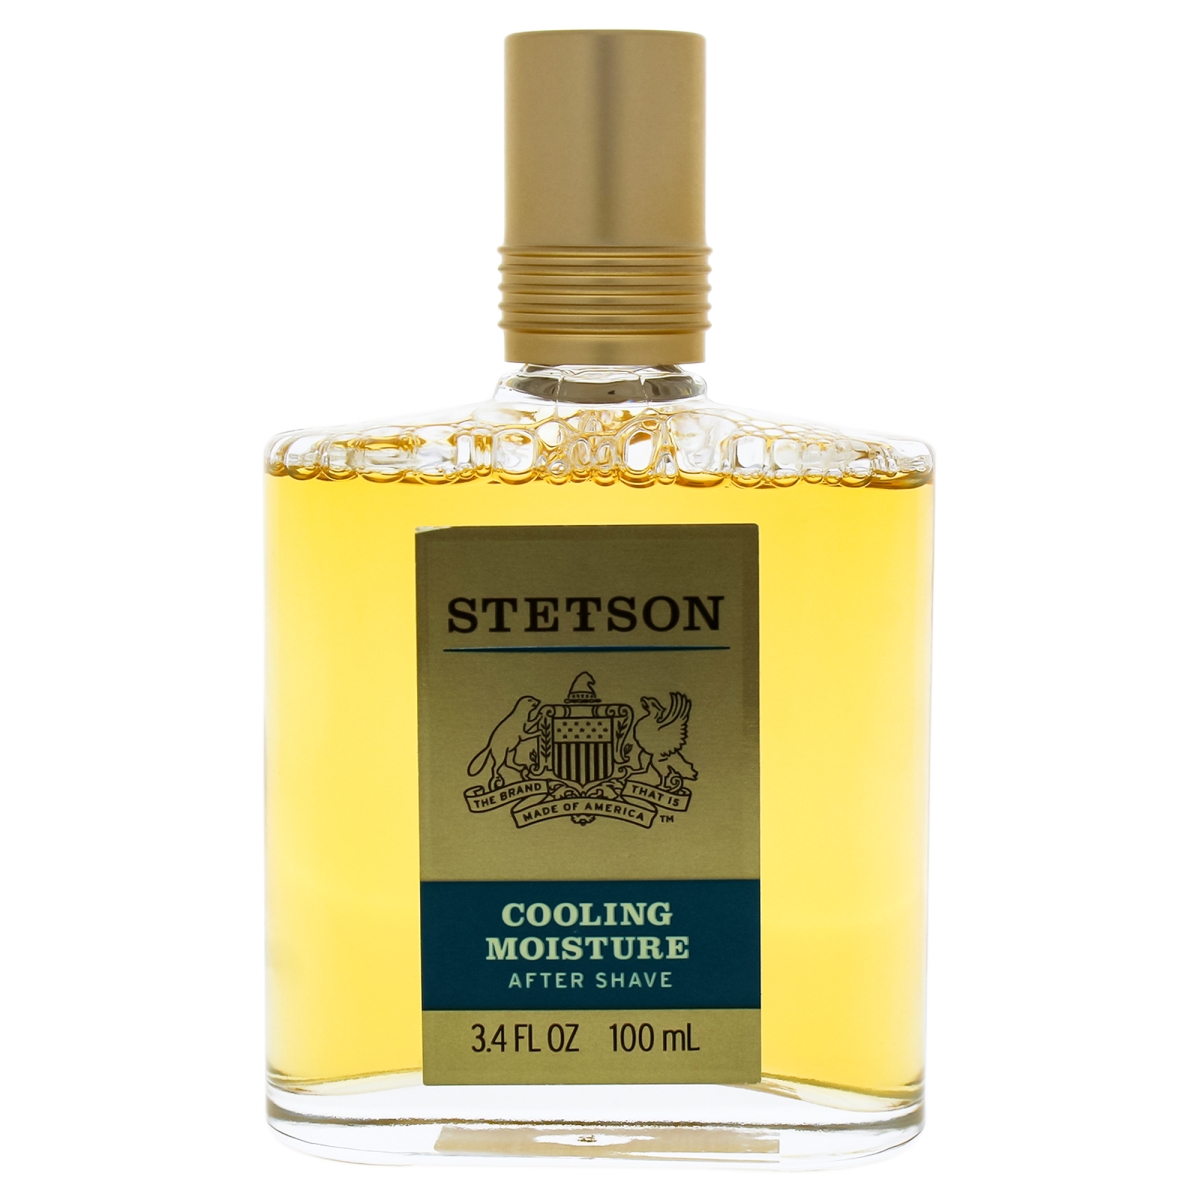 Coty I0085439 Stetson Cooling Moisture After Shave